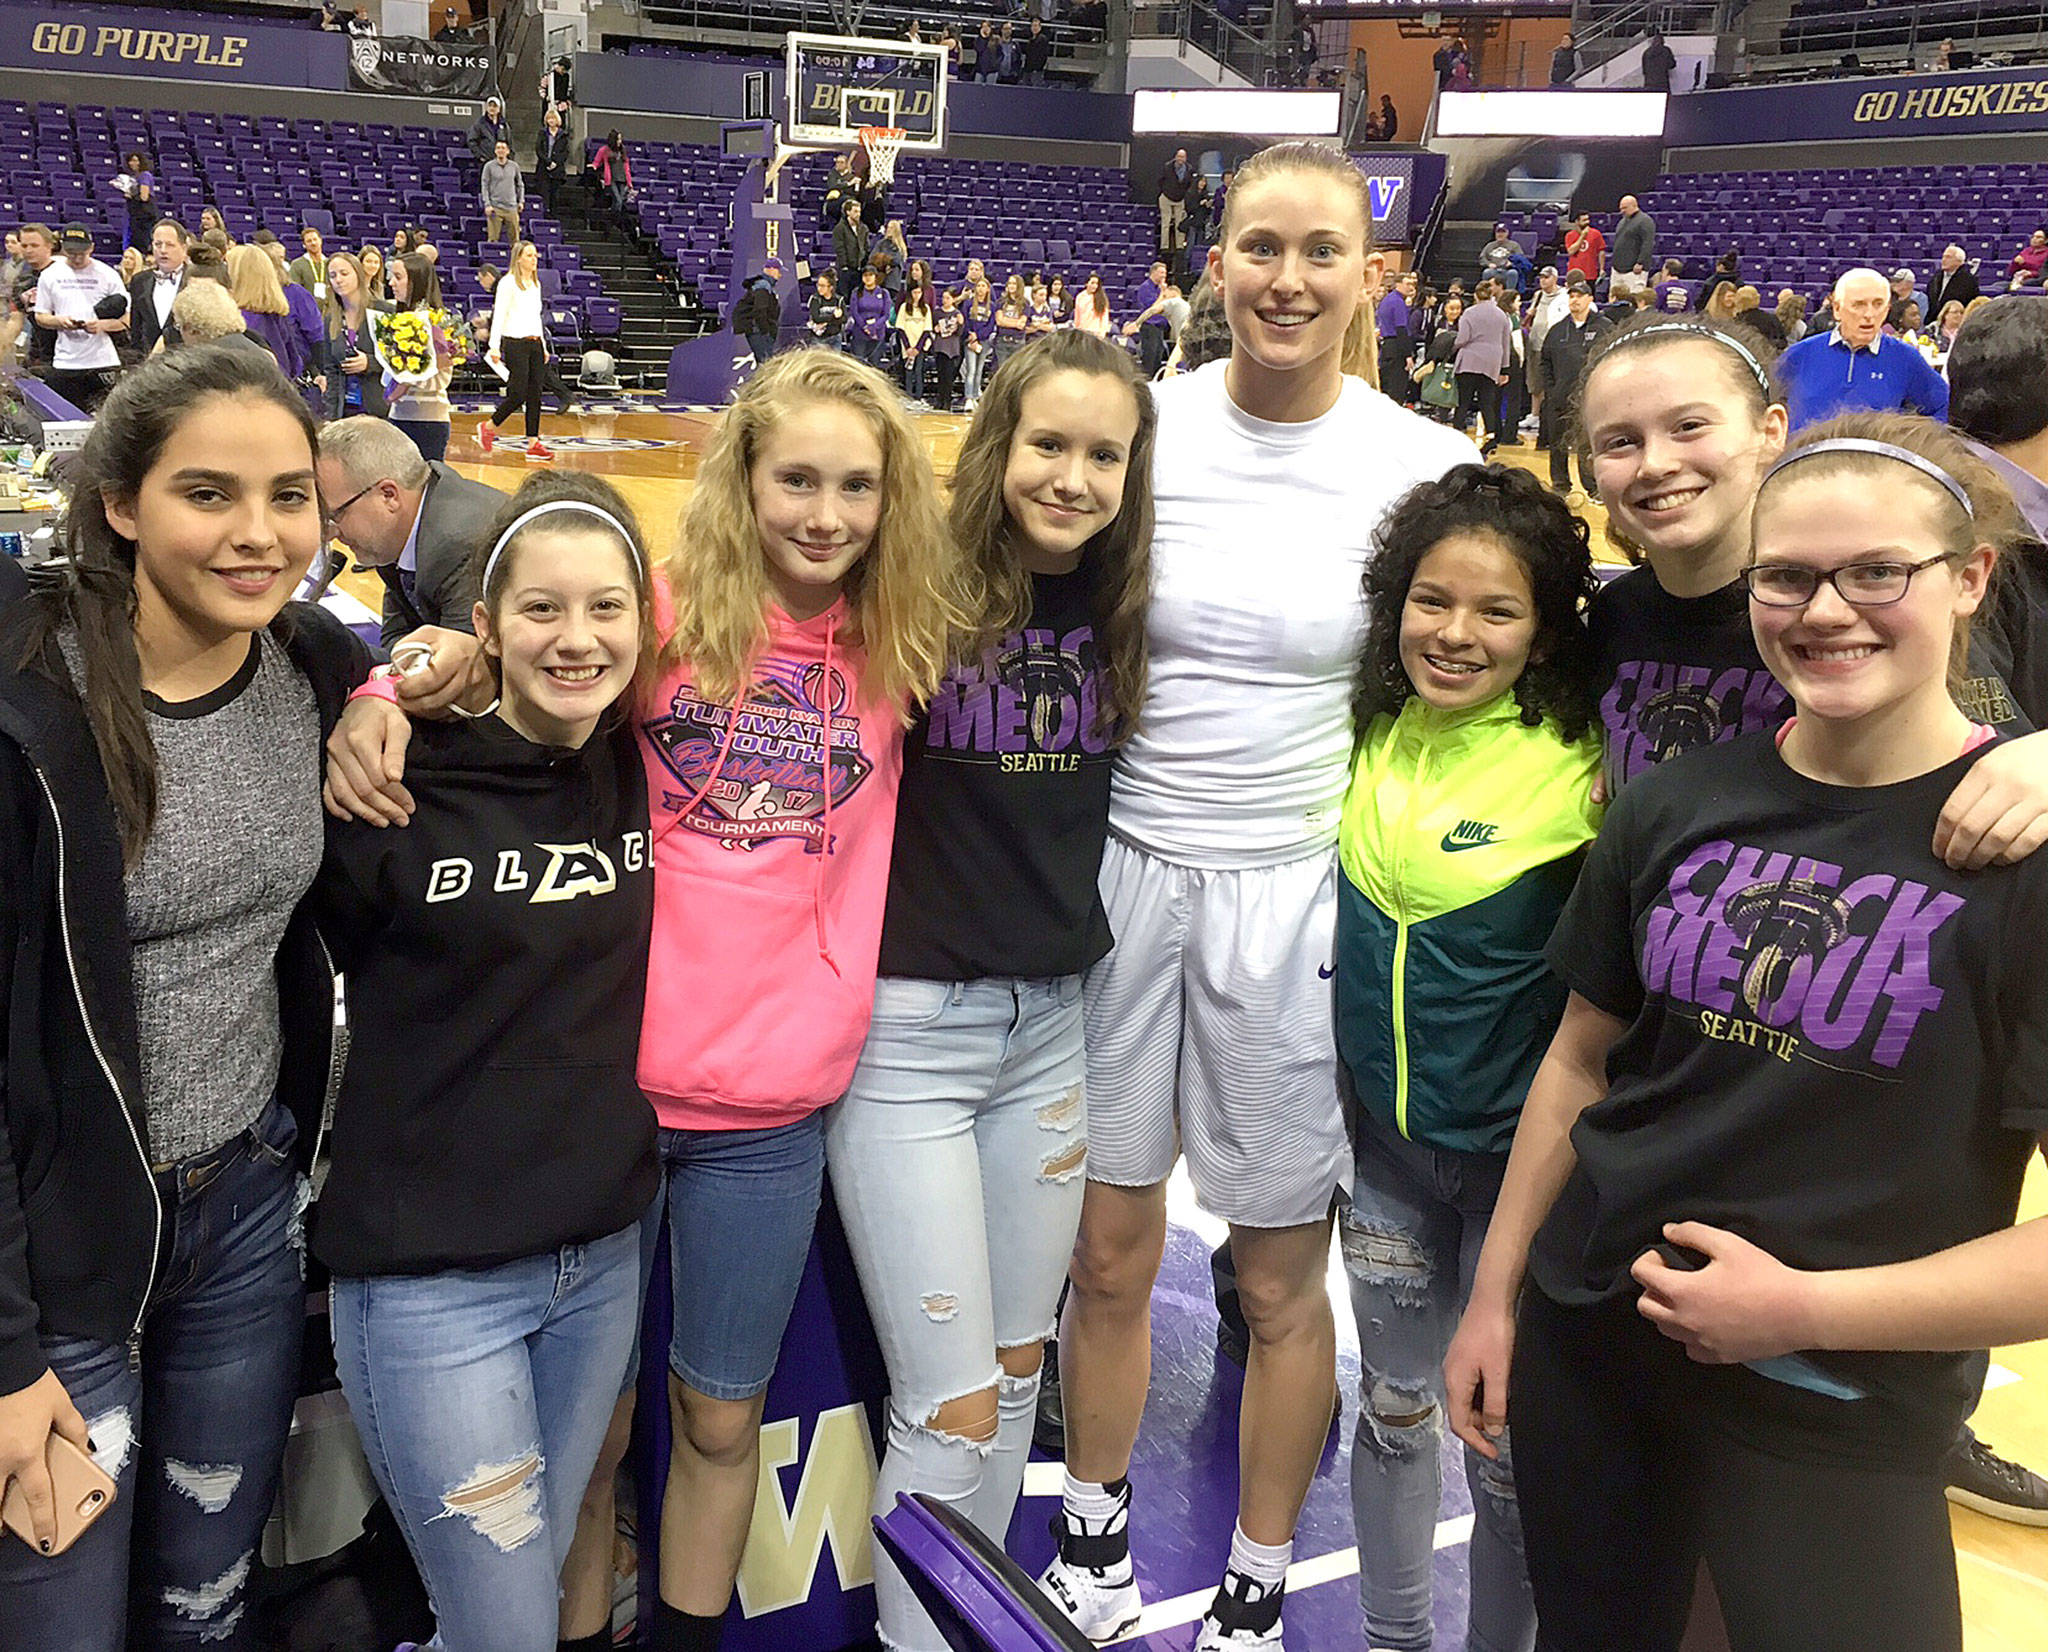 Members of the Olympic Avalanche Black basketball team attend a historic University of Washington women’s game Sunday in whichKelsey Plum scored 57 points to become the all-time NCAA scoring leader. From left, Courtney Swan, Khloe Stanard, Emilia Long,Hannah Reetz, University of Washington player Katie Collier, Camille Stensgard, Jaida Wood and Myra Walker.